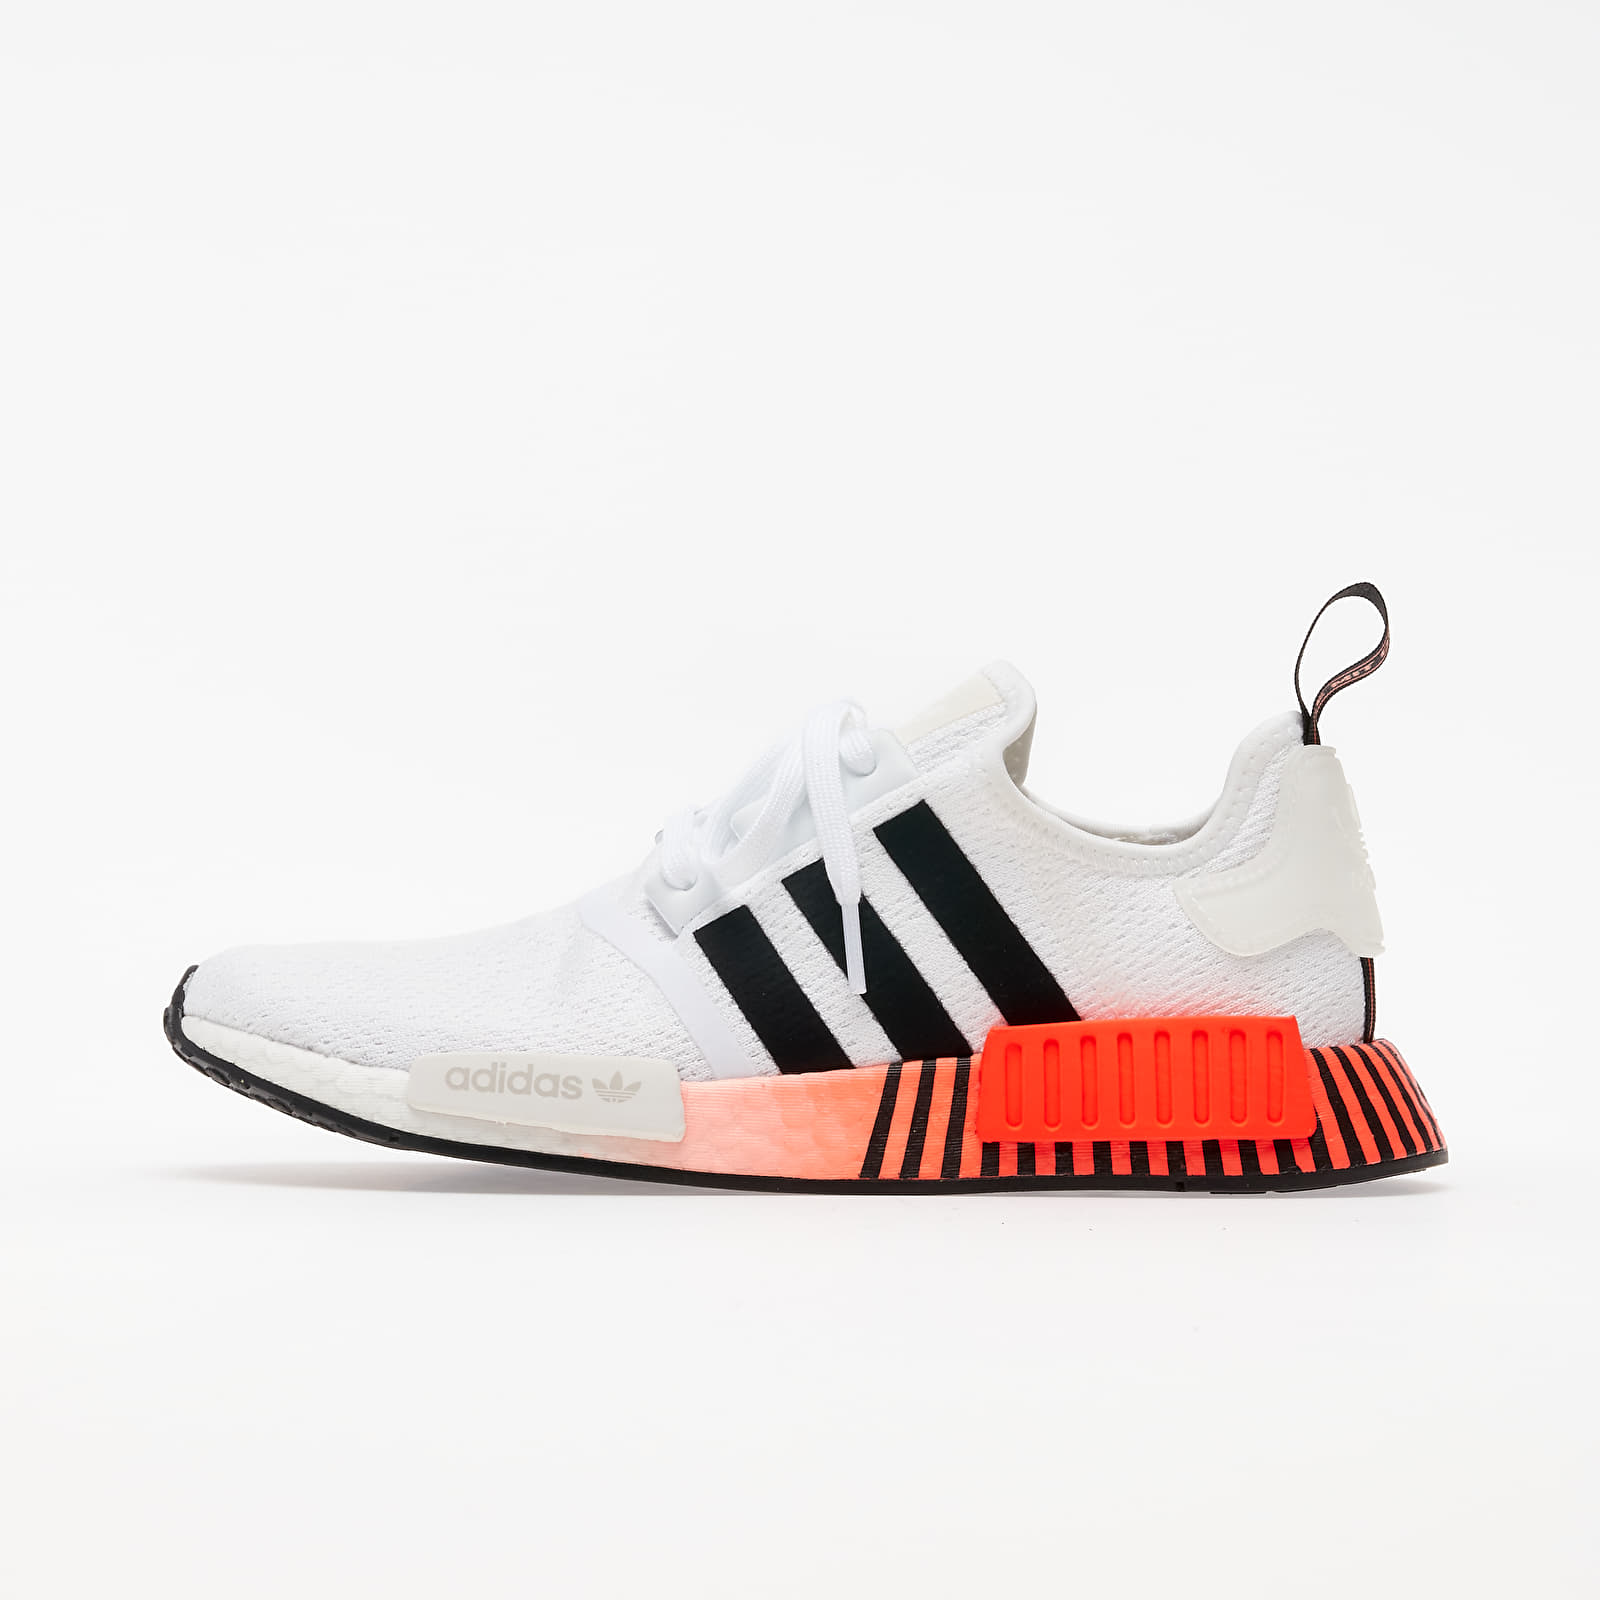 Chaussures et baskets homme adidas NMD_R1 Ftw White/ Core Black/ Solid Red